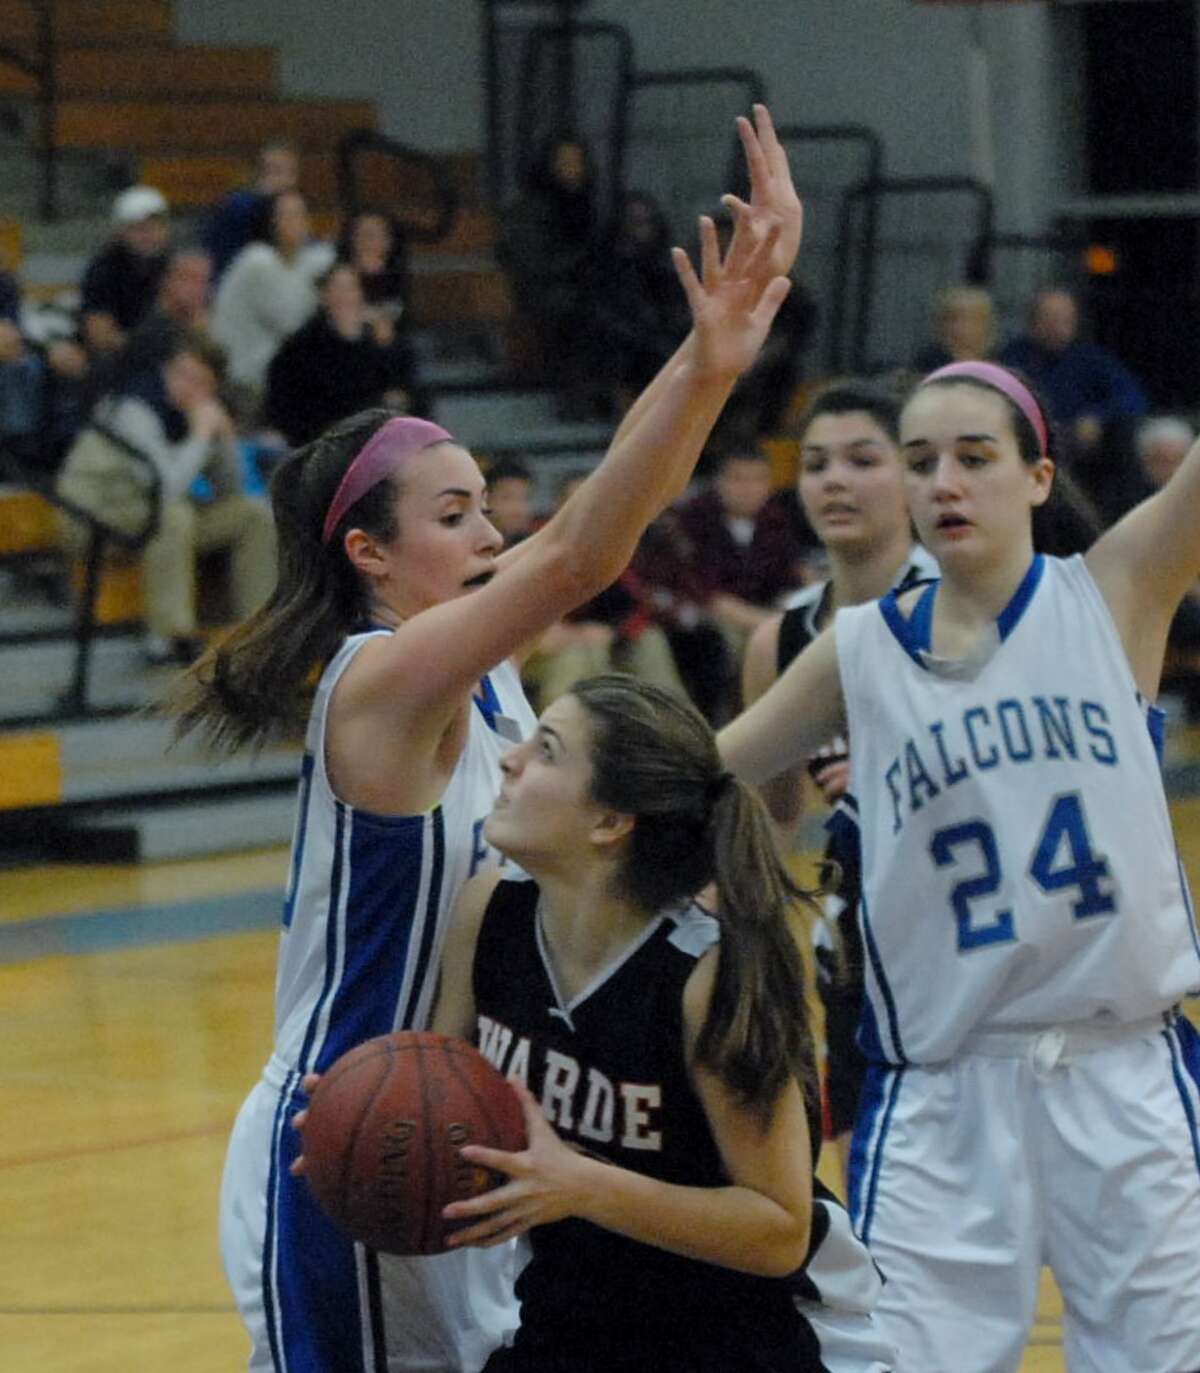 Fairfield Warde goes up for a shot against Ludlowe during Tuesday’s girls’ basketball game. Photo by Mary Albl